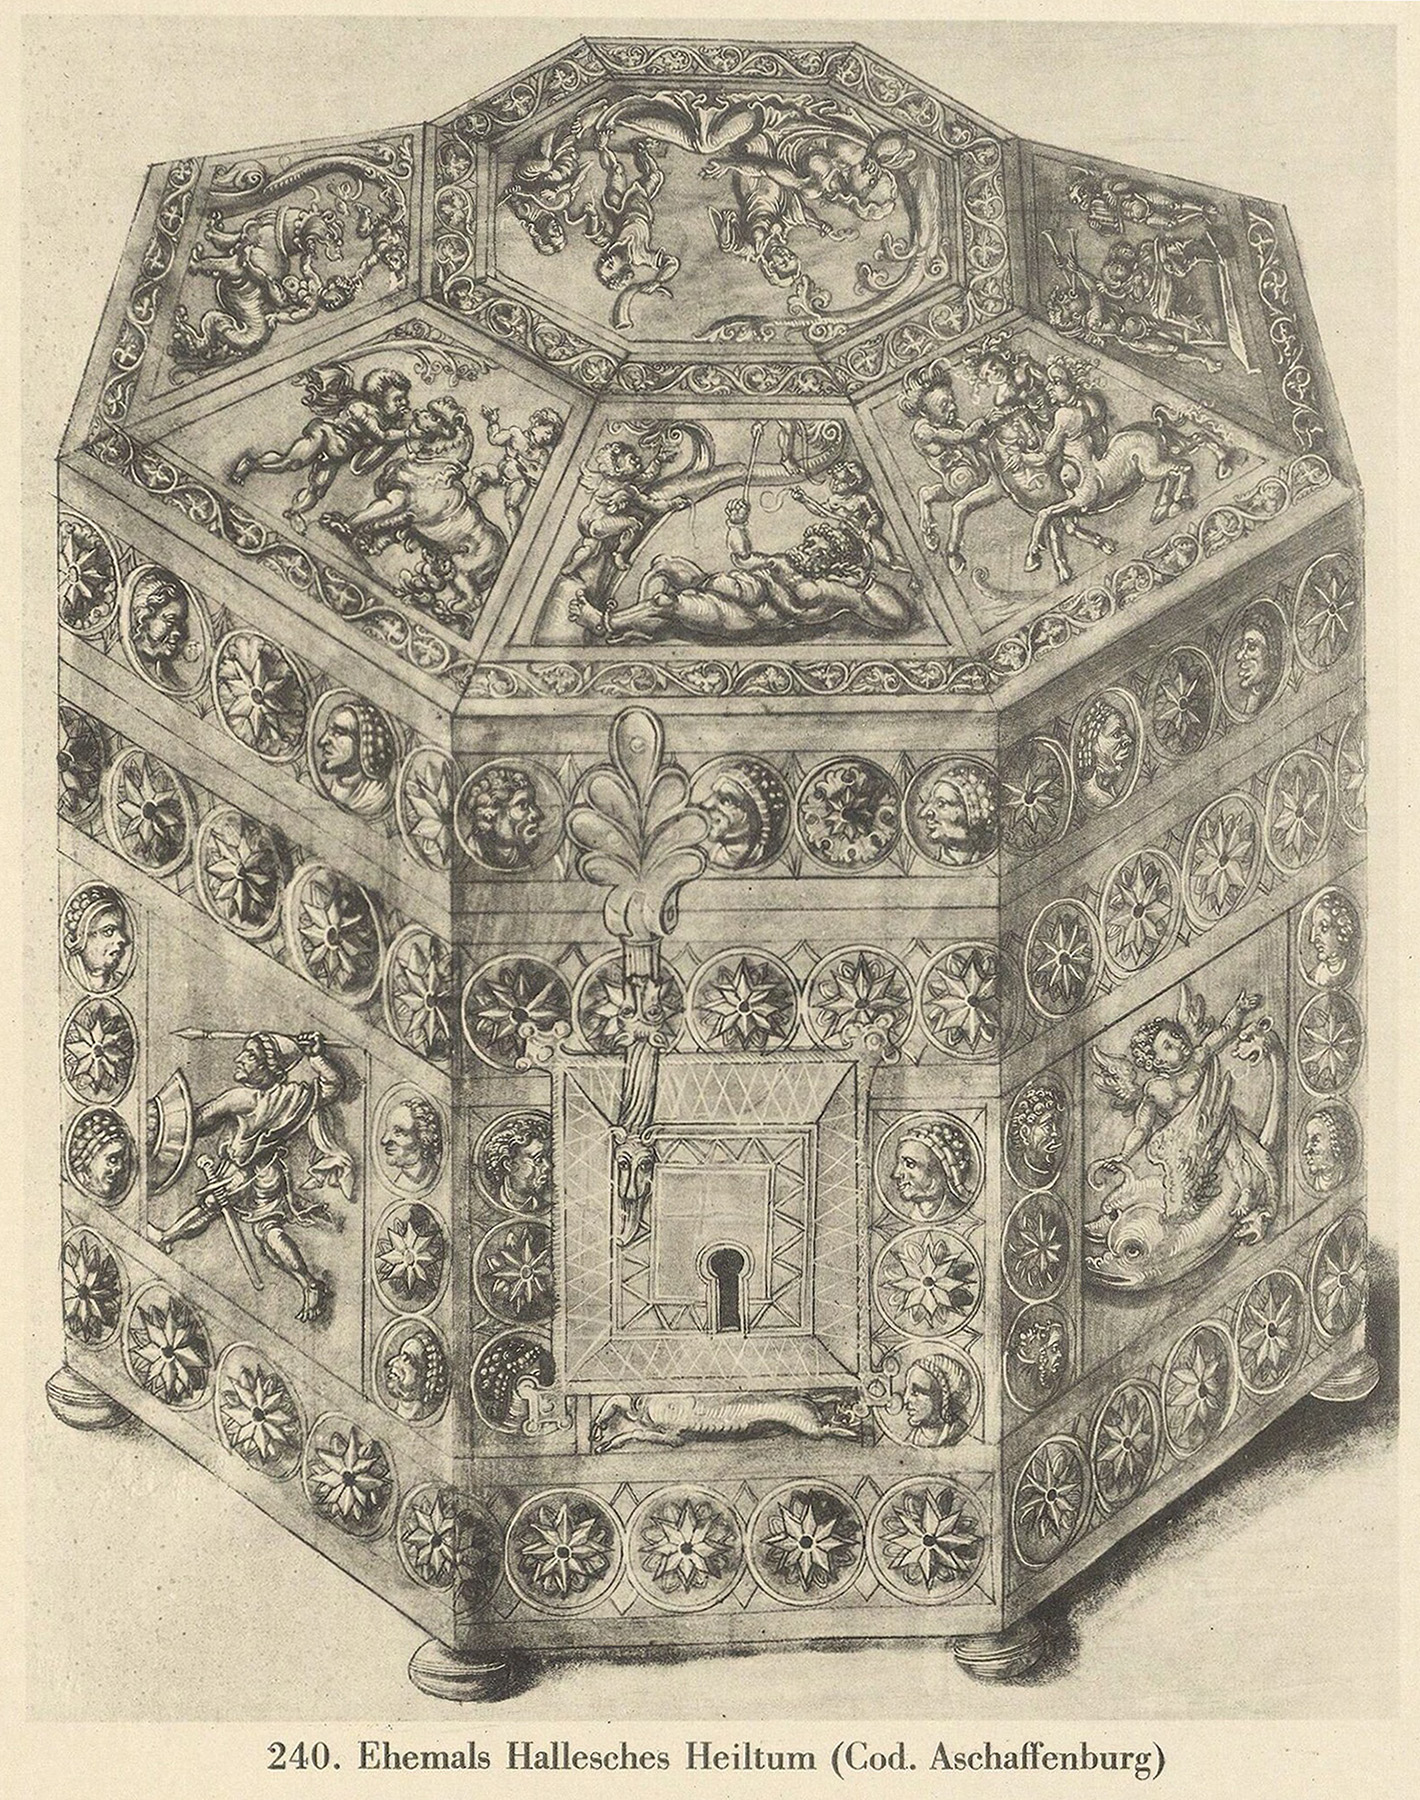 A drawing of an octagonal, ivory box.